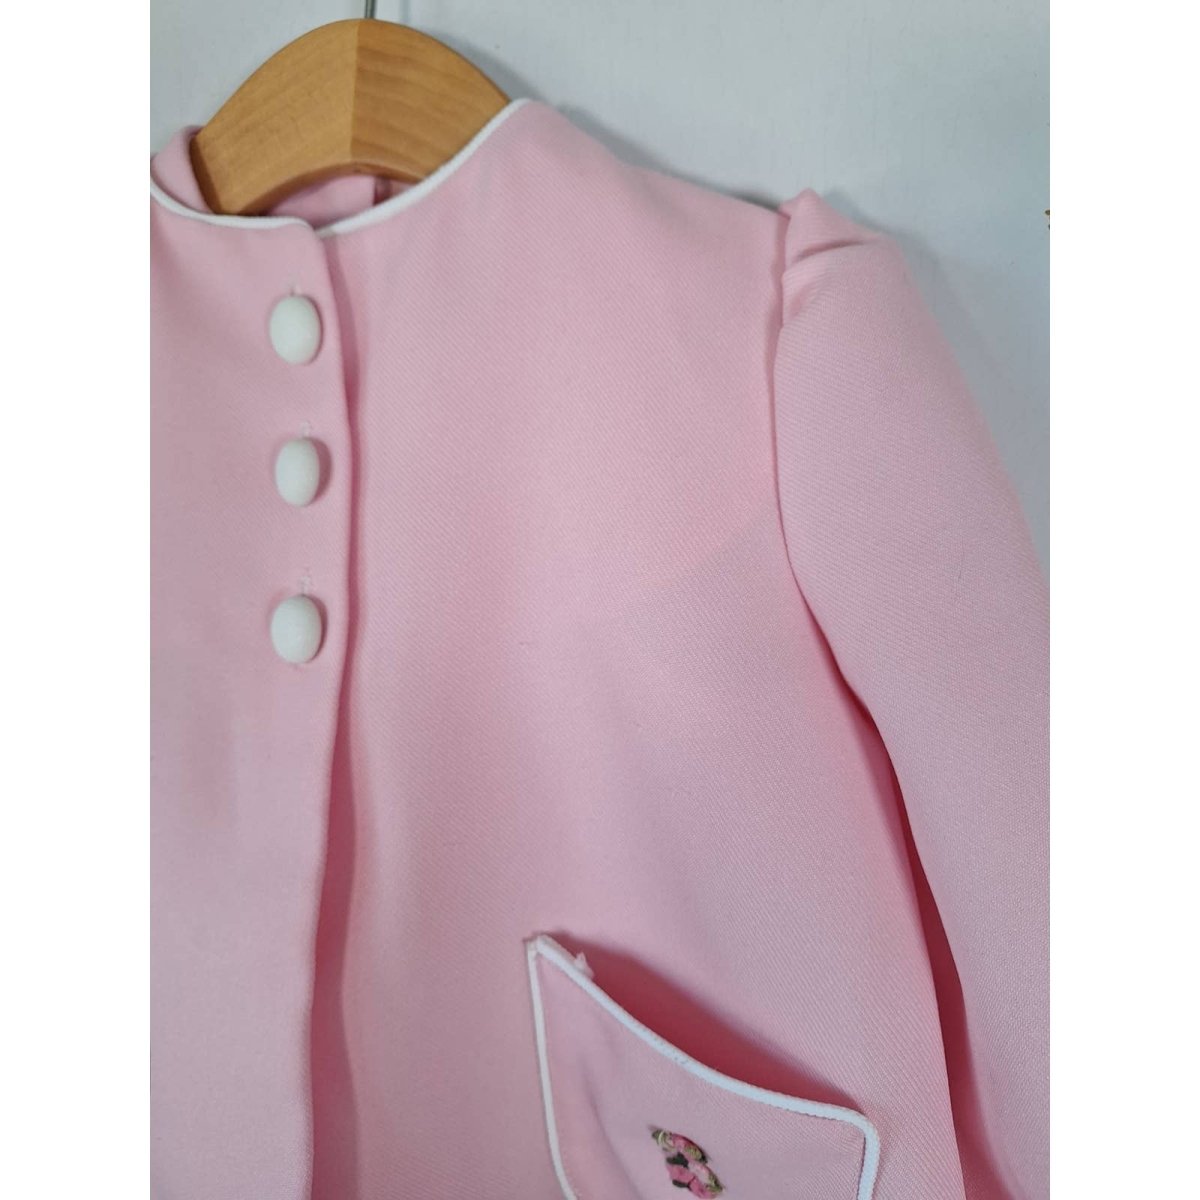 Vintage Girls 70s Pink Dress & Jacket Set Chest 24" Length 17" Toddler 2-3T - themallvintage The Mall Vintage